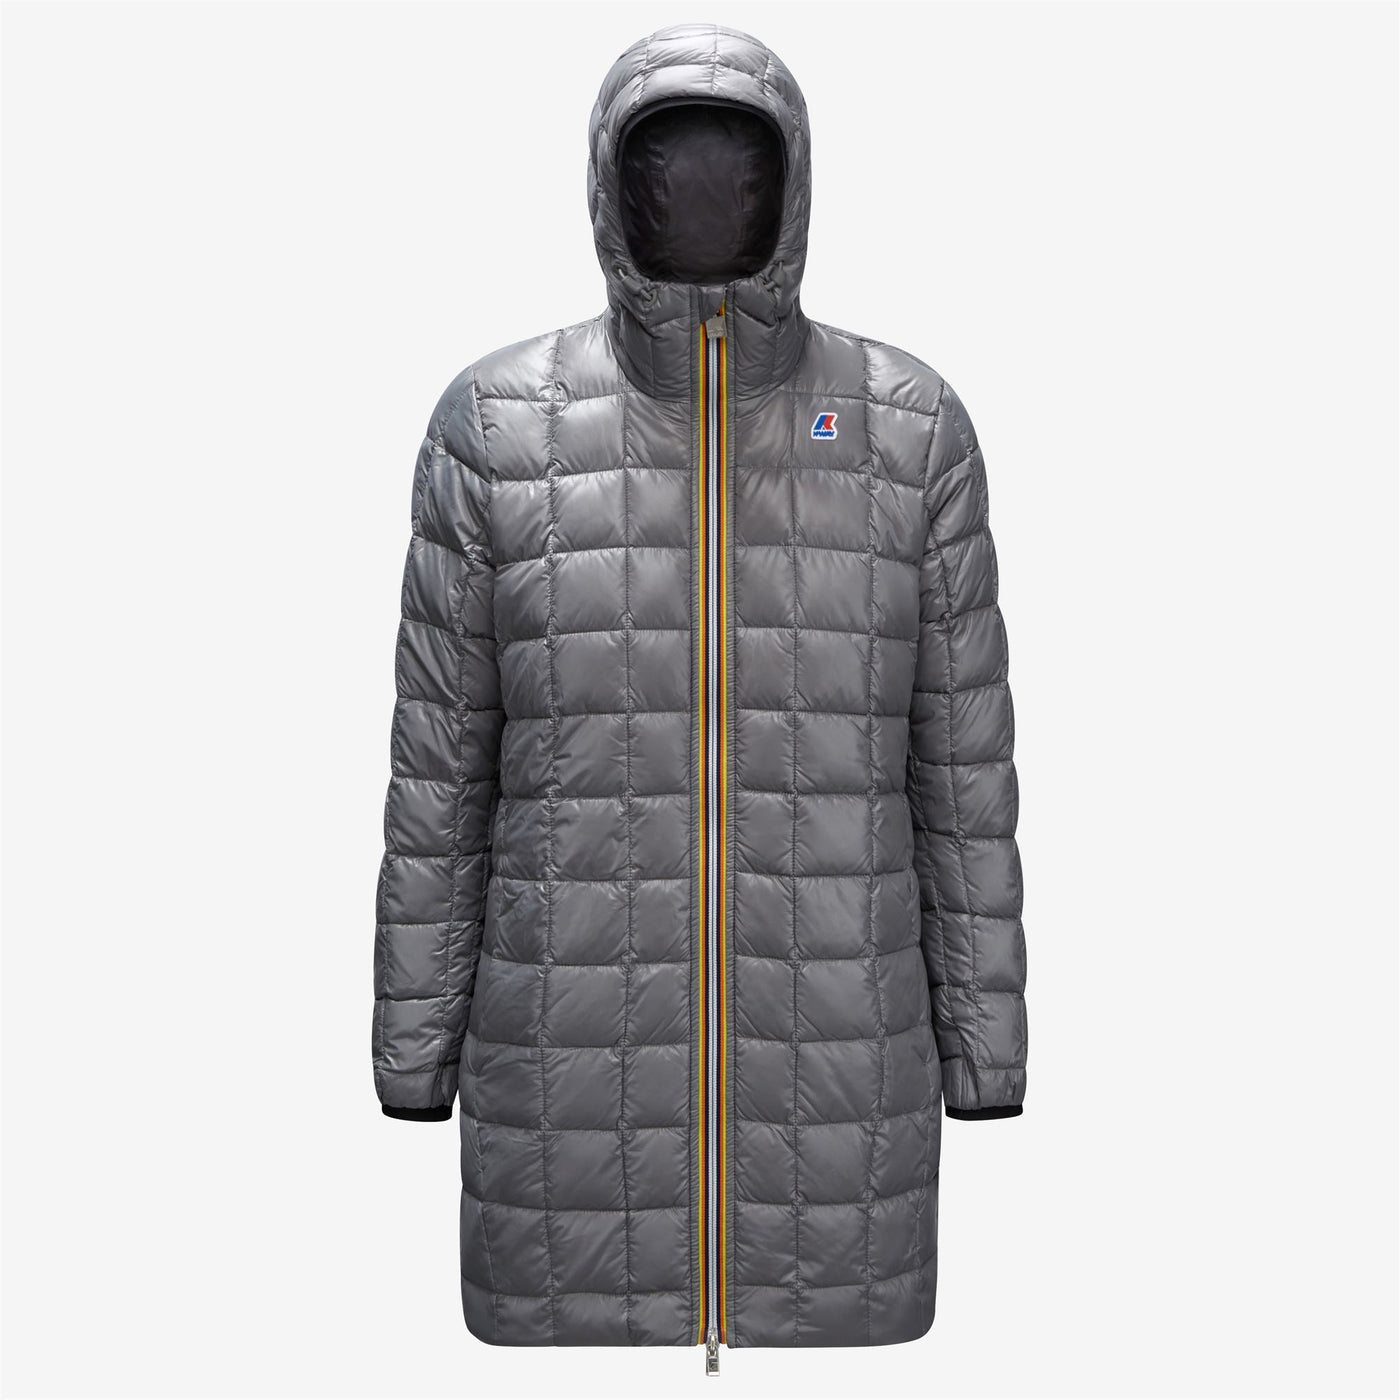 Jackets Woman SOPHIE THERMO PLUS.2 DOUBLE Mid BLACK PURE - GREY MD STEEL Dressed Front (jpg Rgb)	